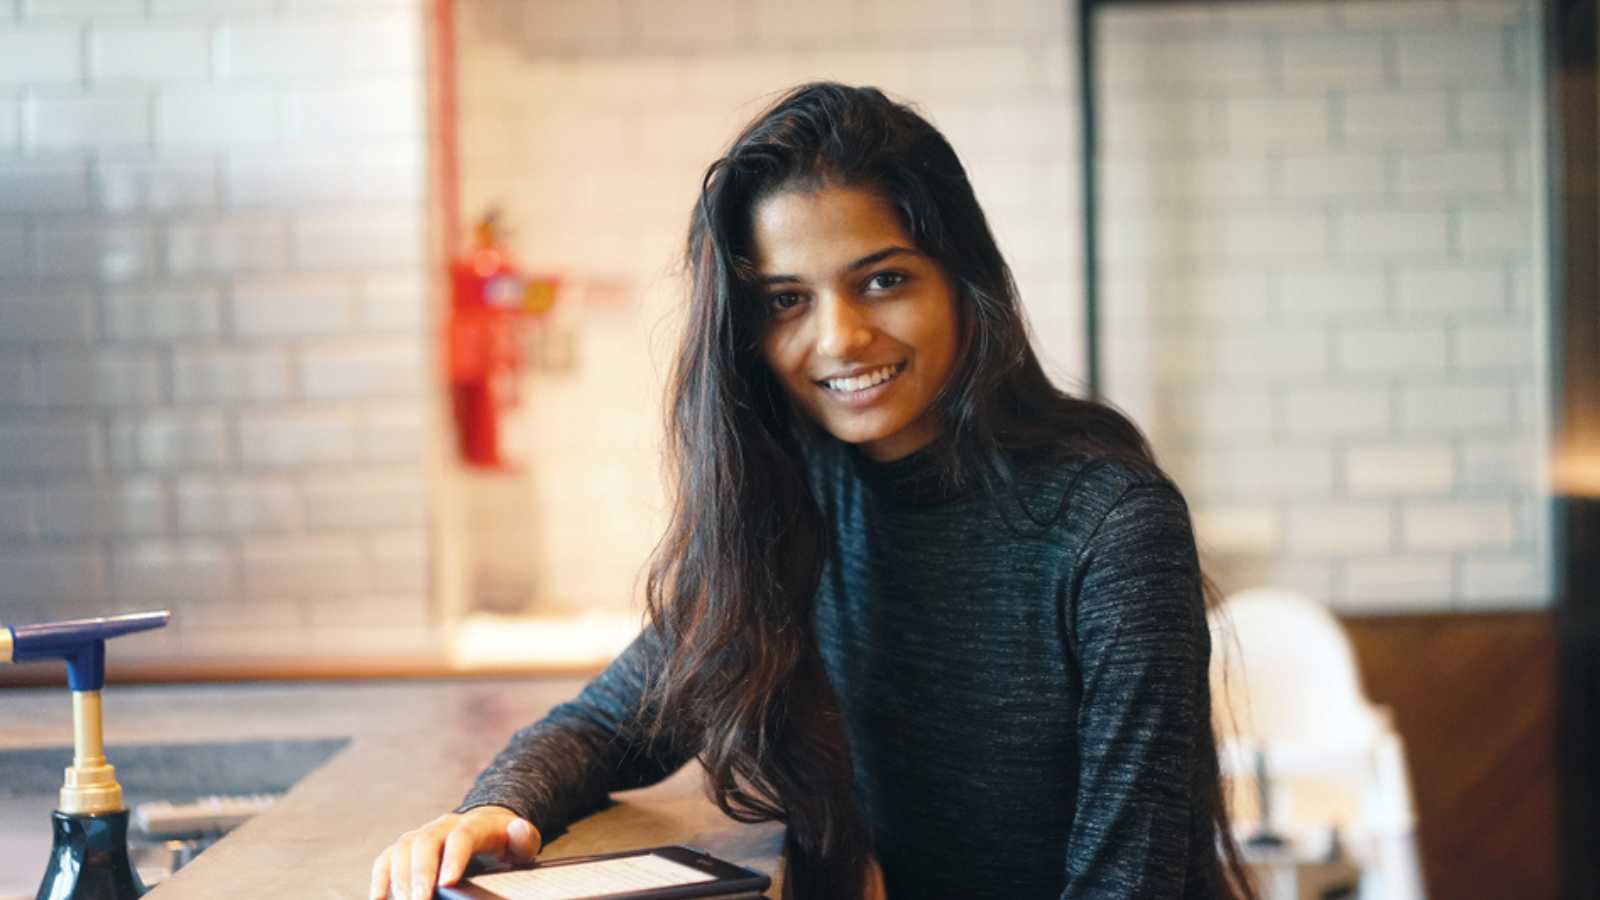 Portrait of a young attractive Indian woman sitting at a table in a cafe, casually and naturally smiling up from her kindle.